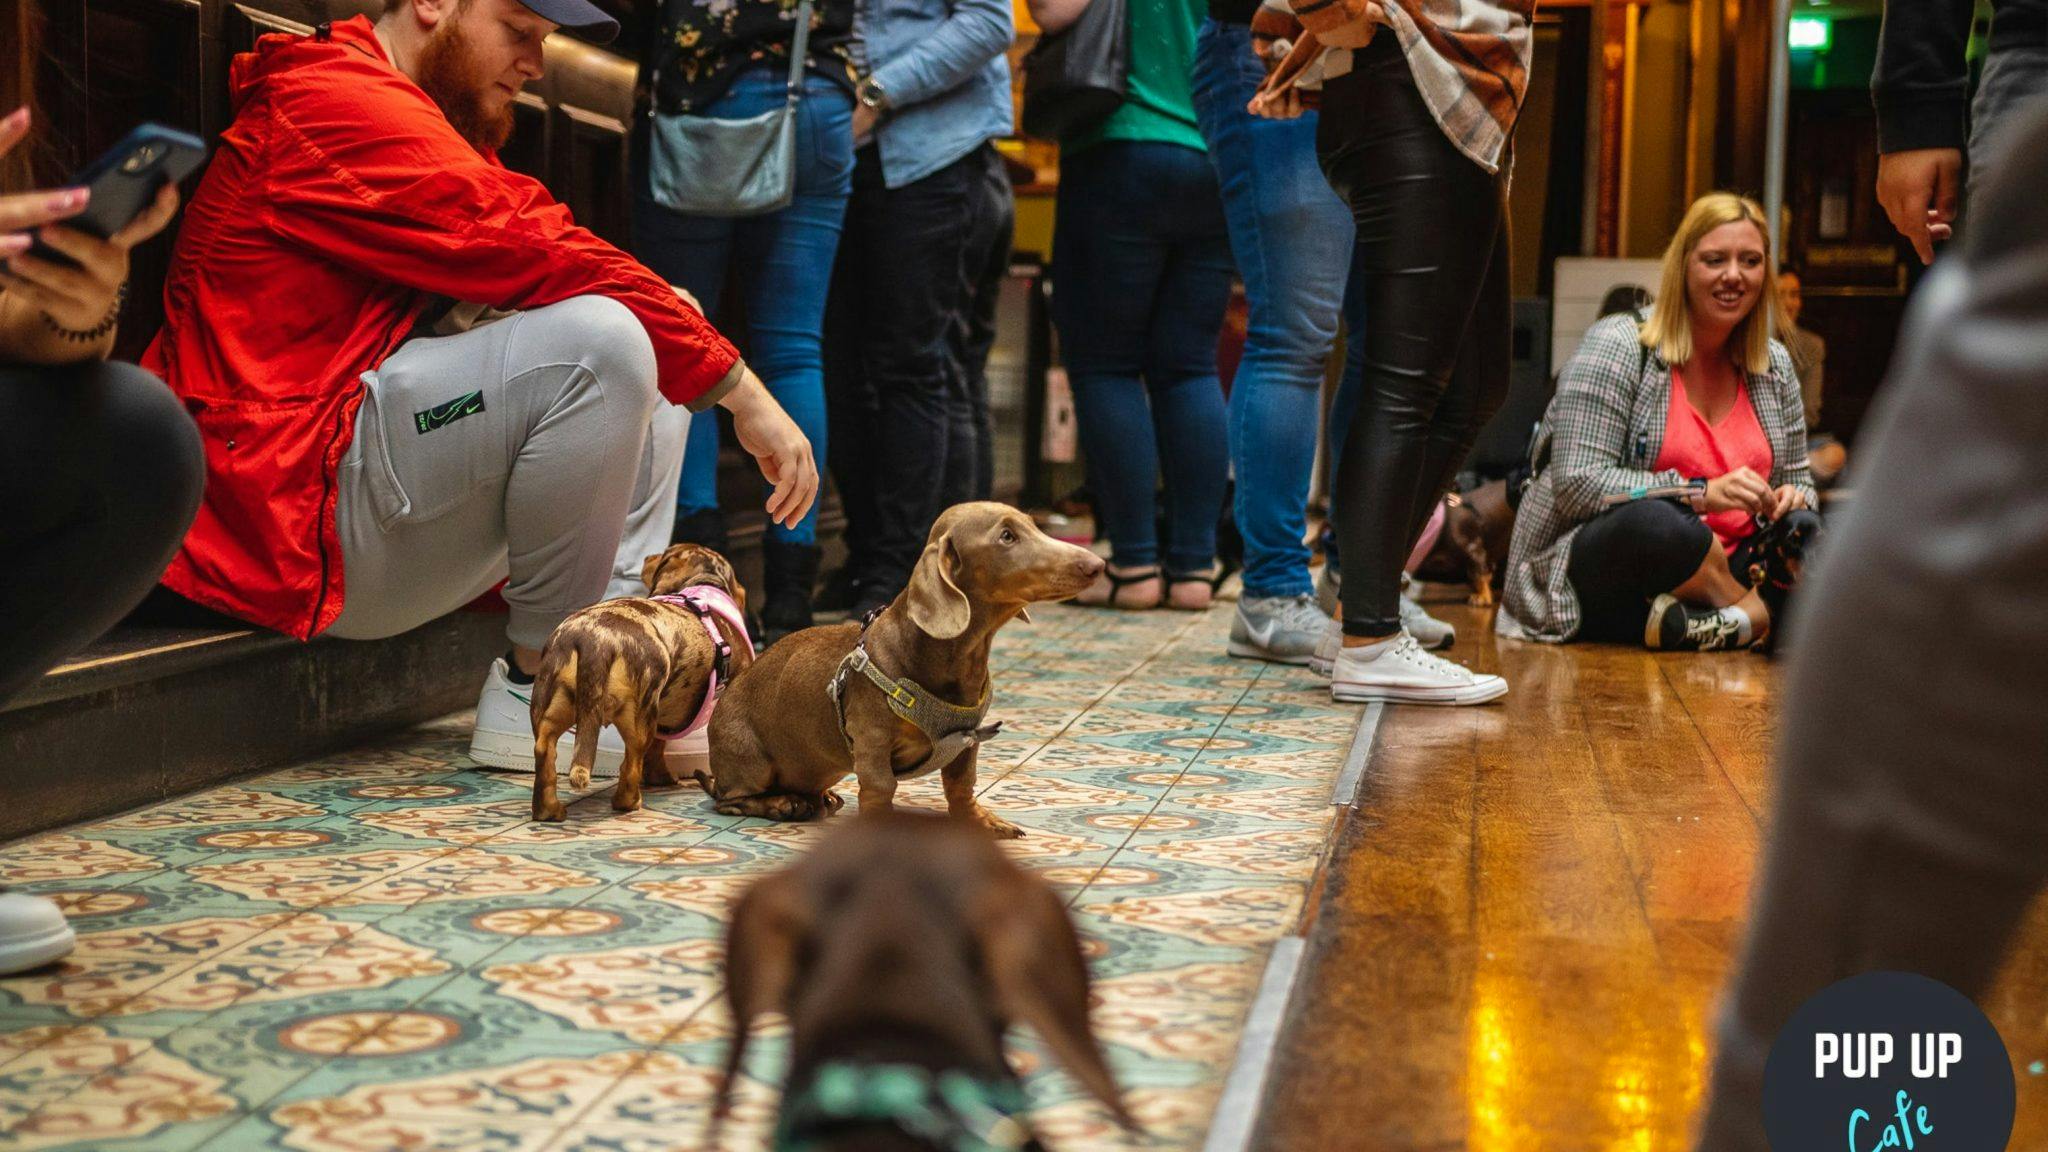 A Pup Up Cafe with hundreds of sausage dogs is coming to Yorkshire this month